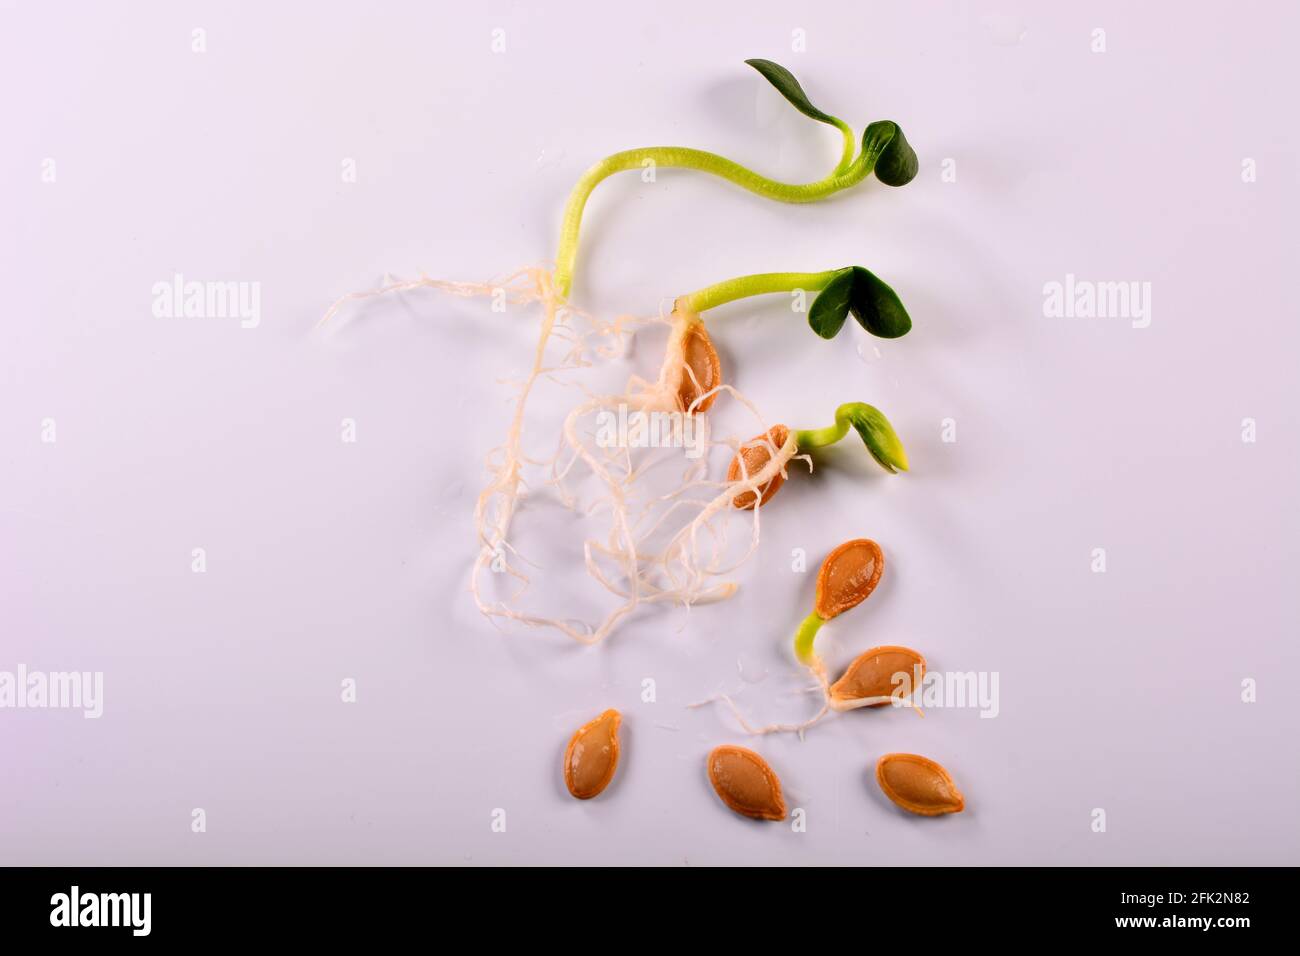 Young live Pumpkin Cucurbita seeds with developing root systems at early stage to later stages of germination showing the various cycles Stock Photo